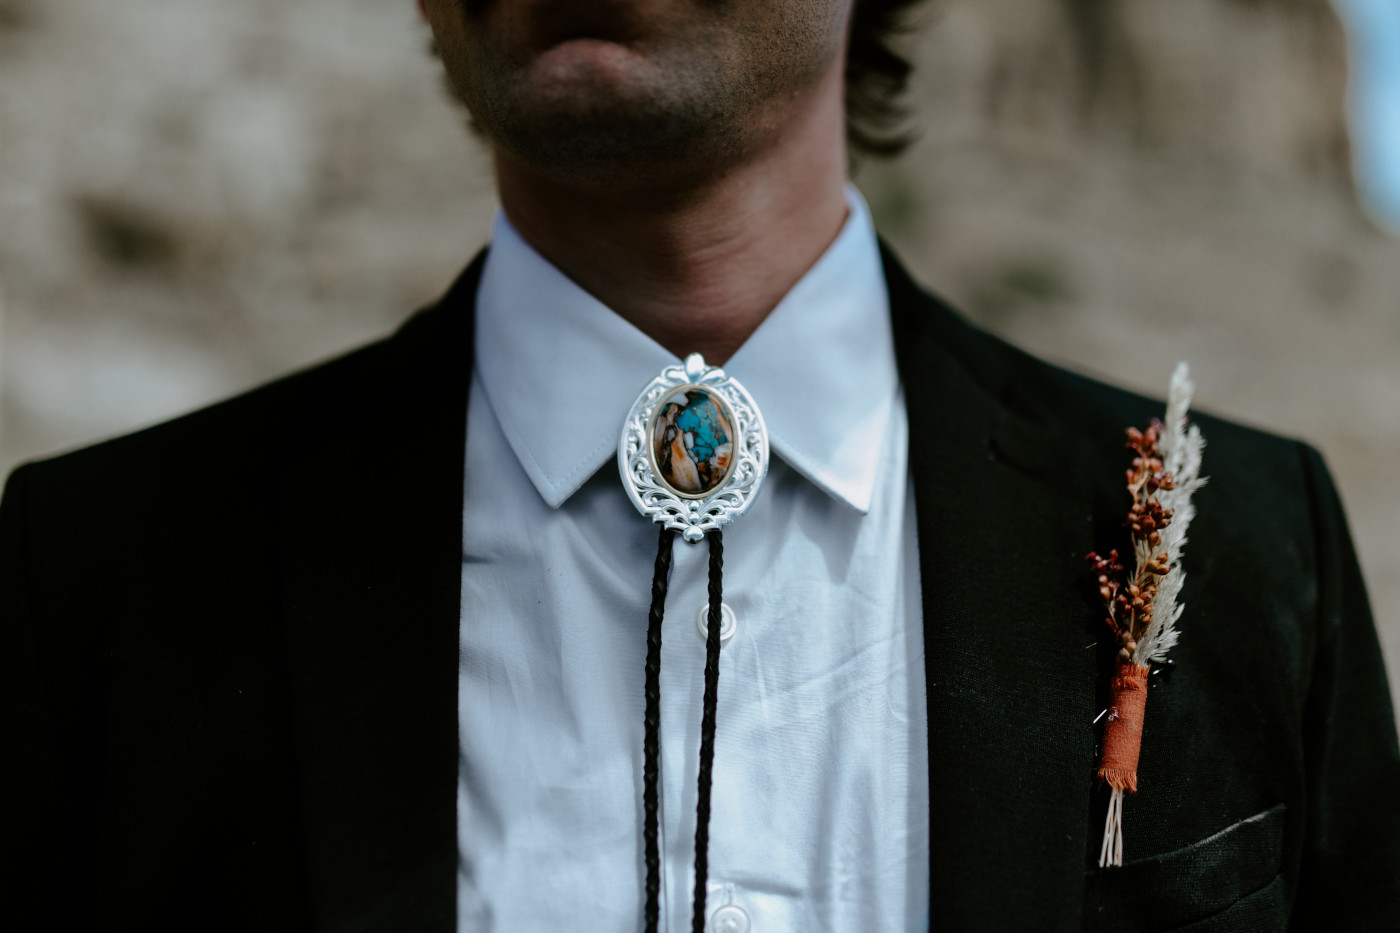 Greyson's bolo tie. Elopement photography in the Central Oregon desert by Sienna Plus Josh.